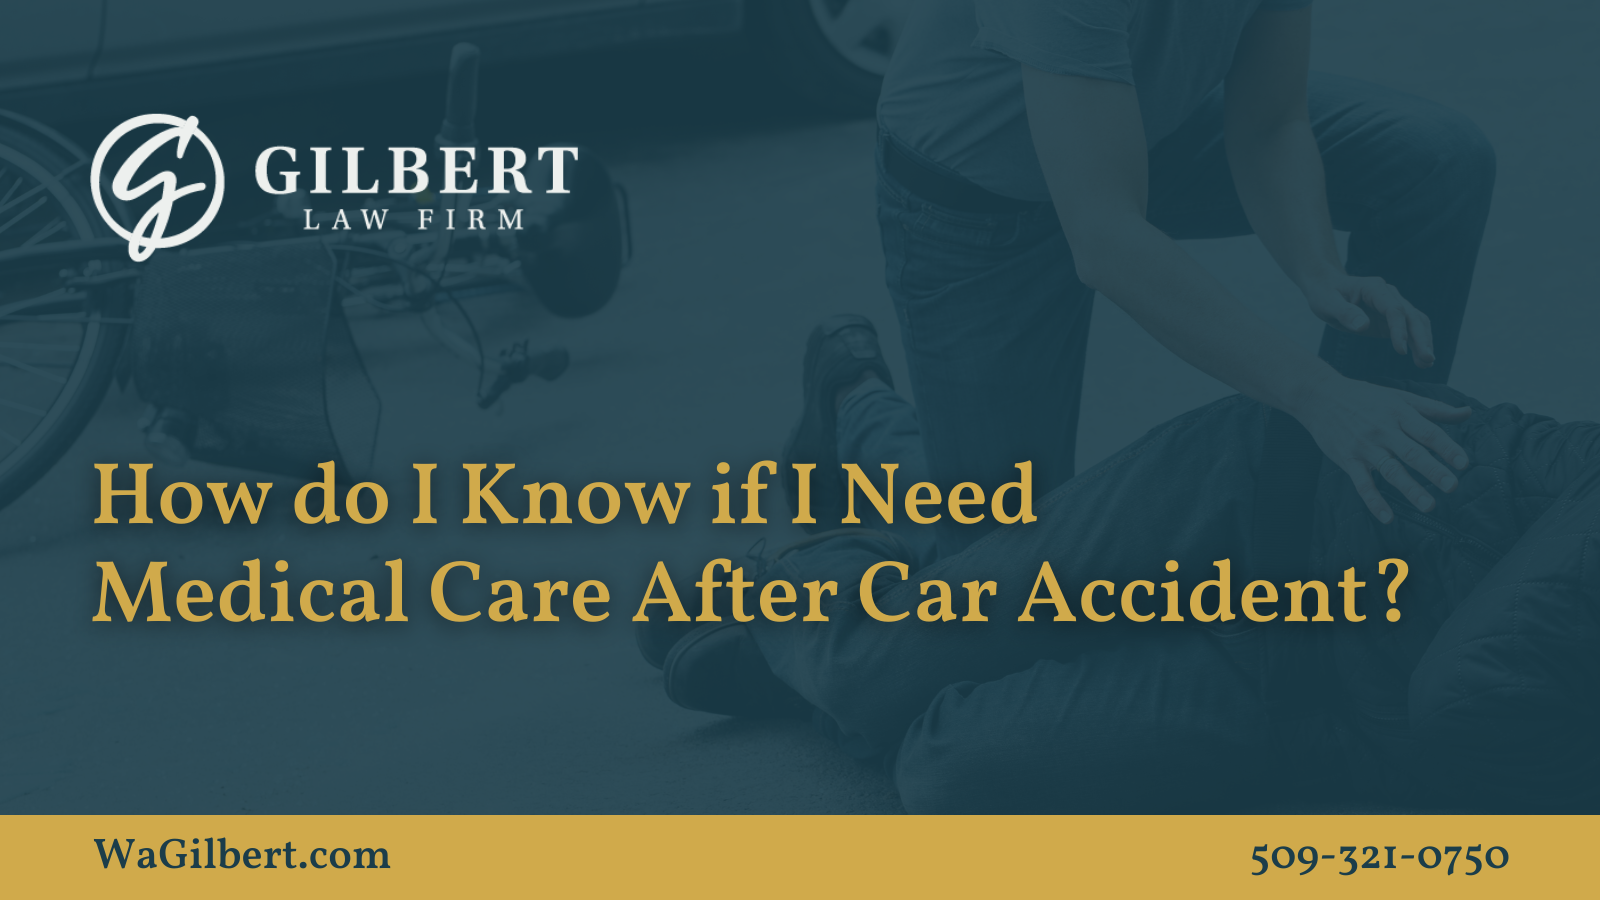 How do I Know if I Need Medical Care After Car Accident | Gilbert Law Firm Spokane Washington